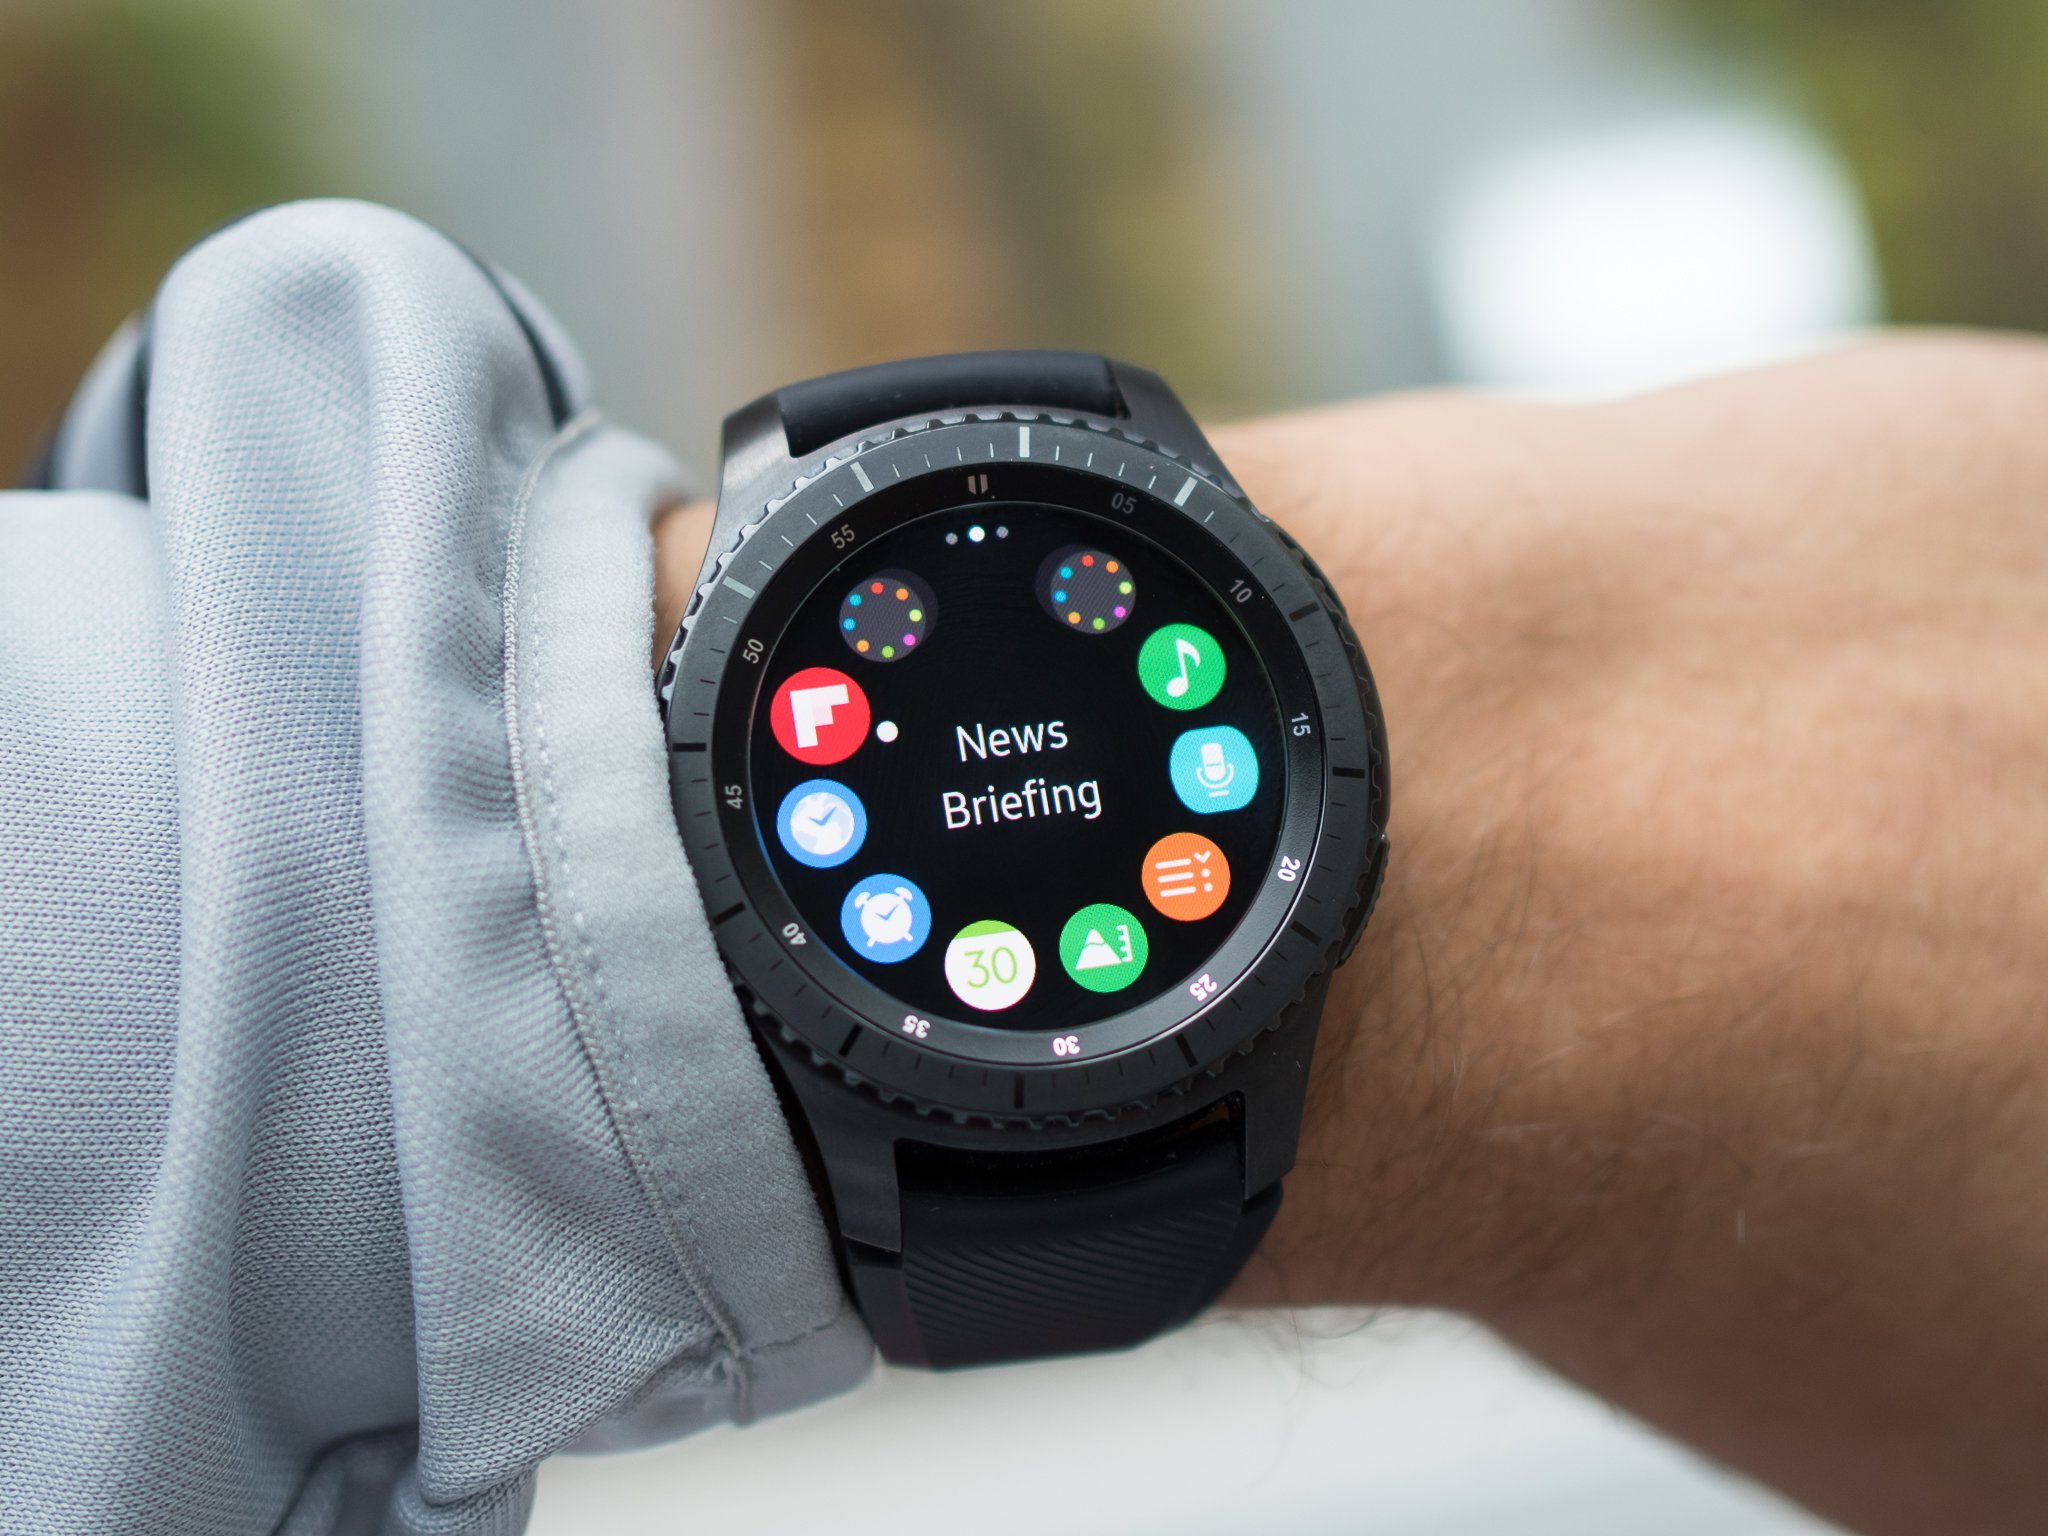 Gear S3 gets Tizen 3.0 update with 